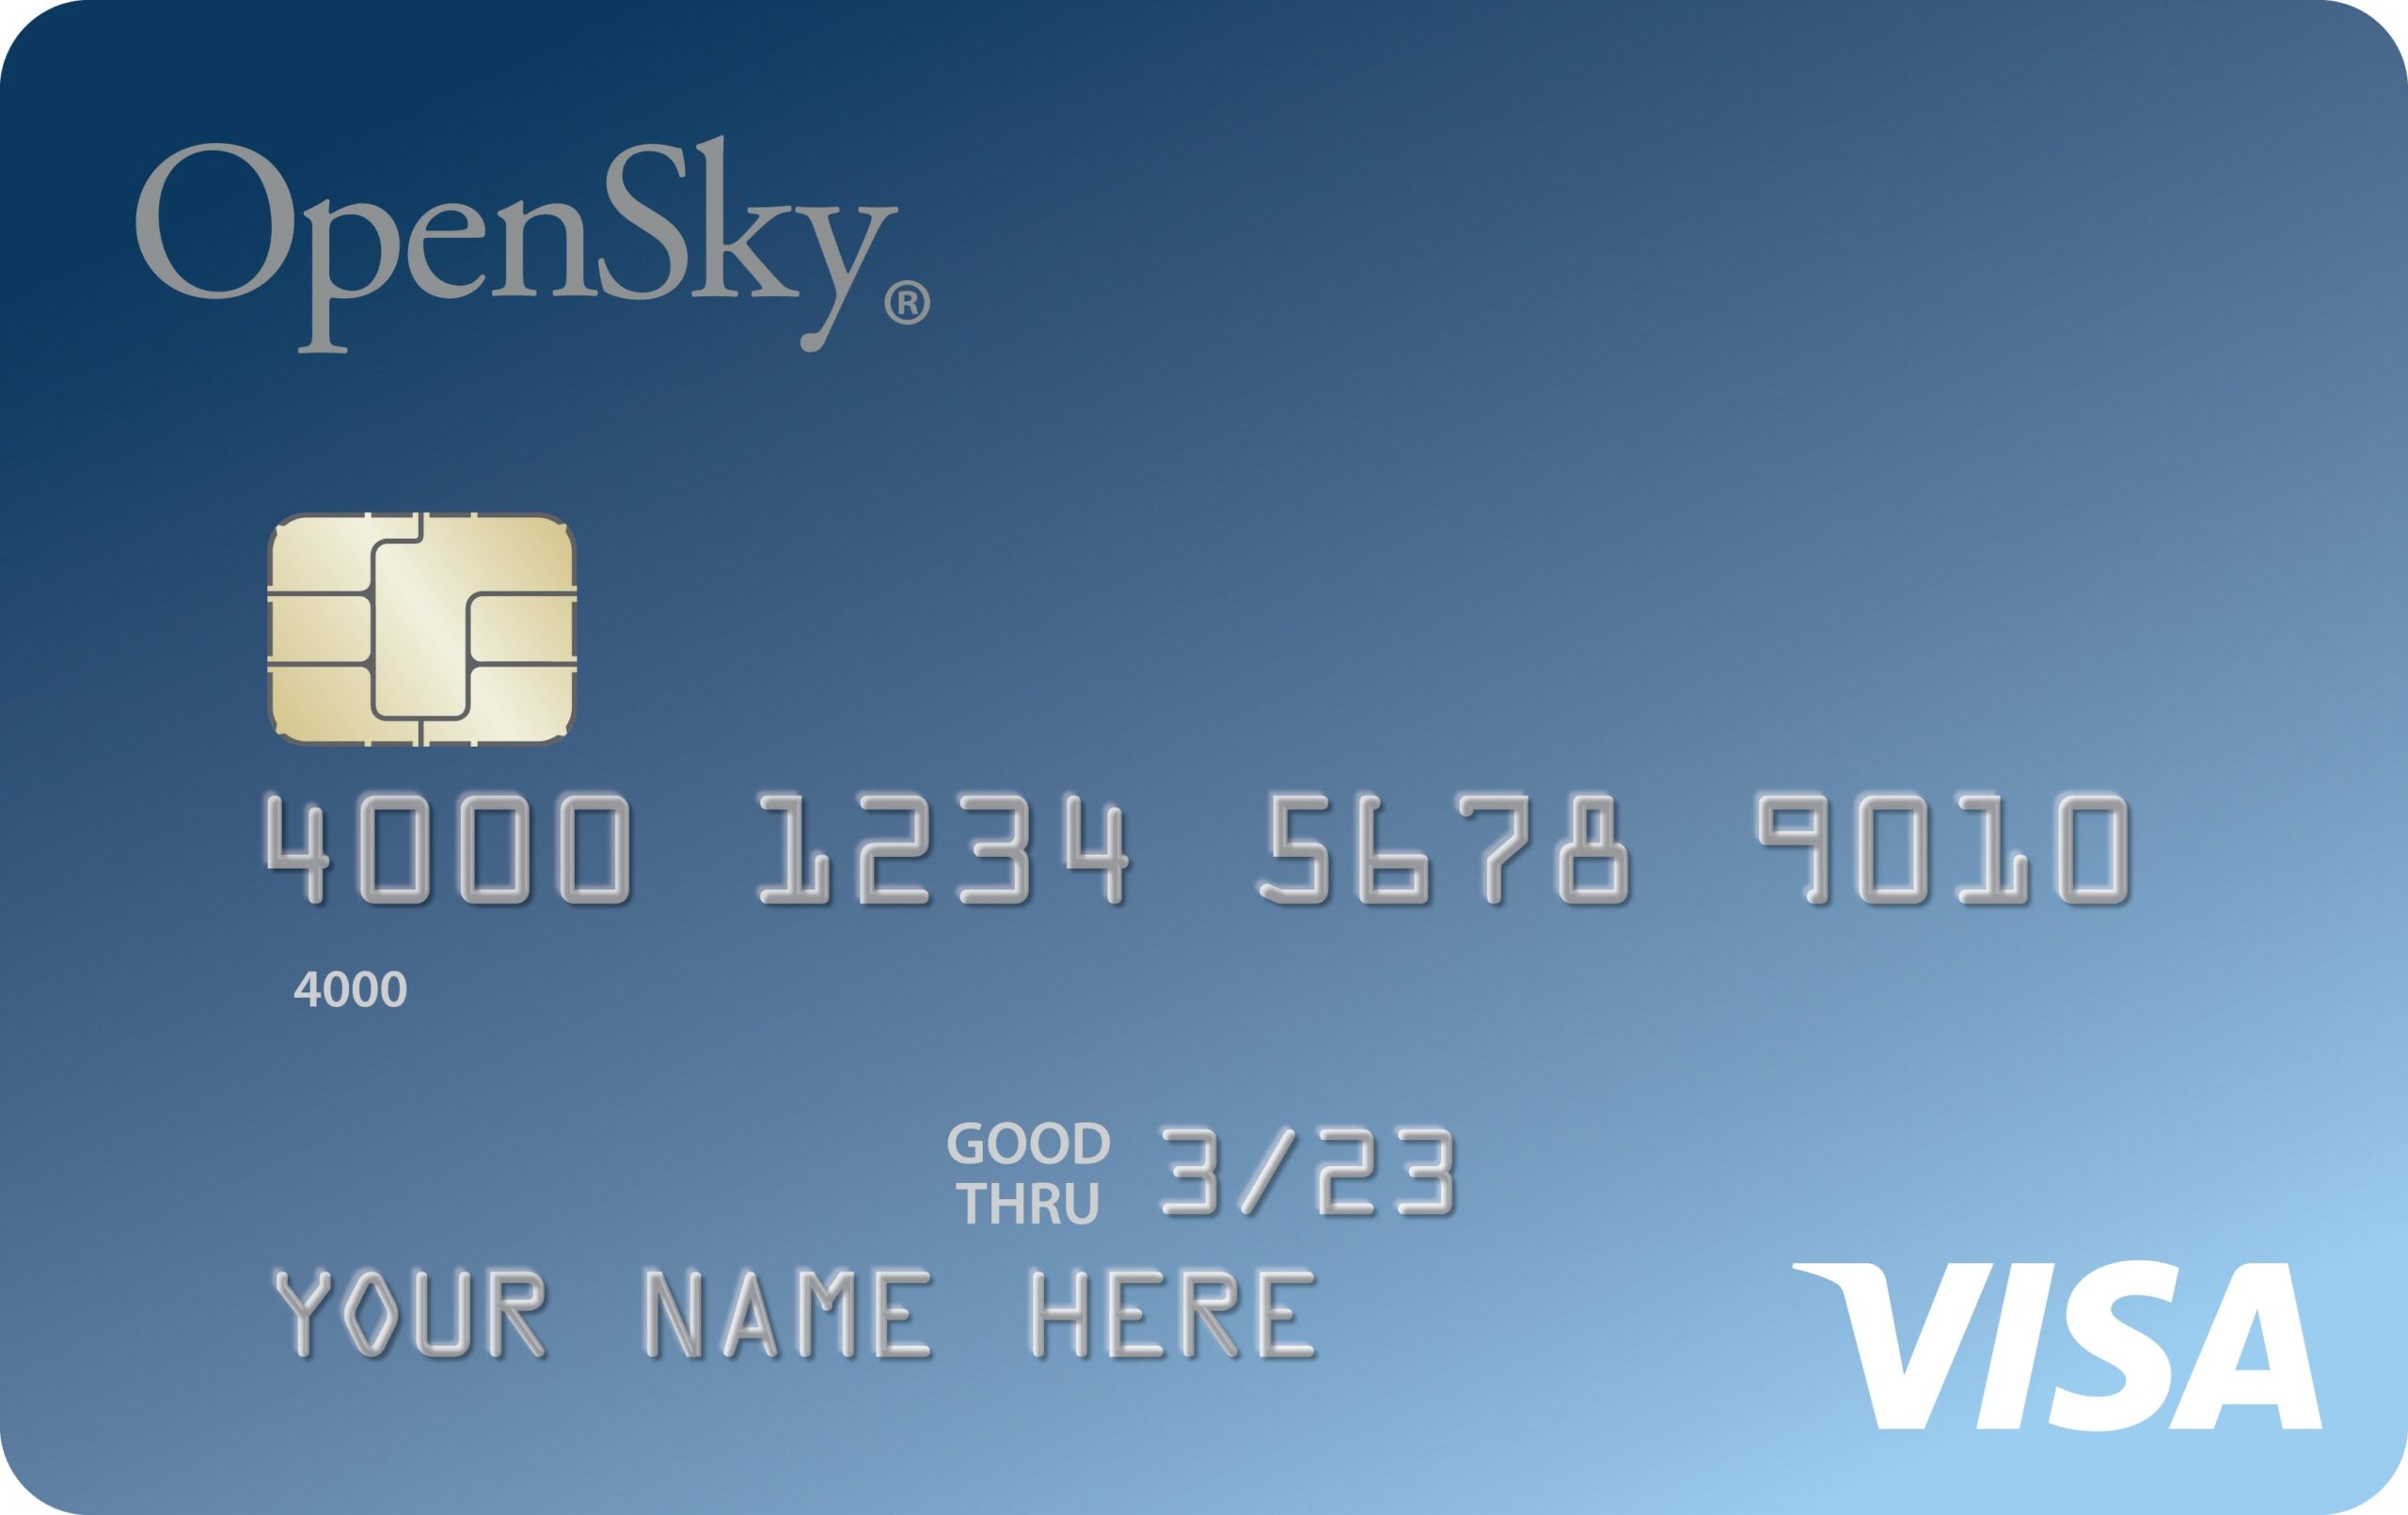 Apply for your OpenSky secure Visa card